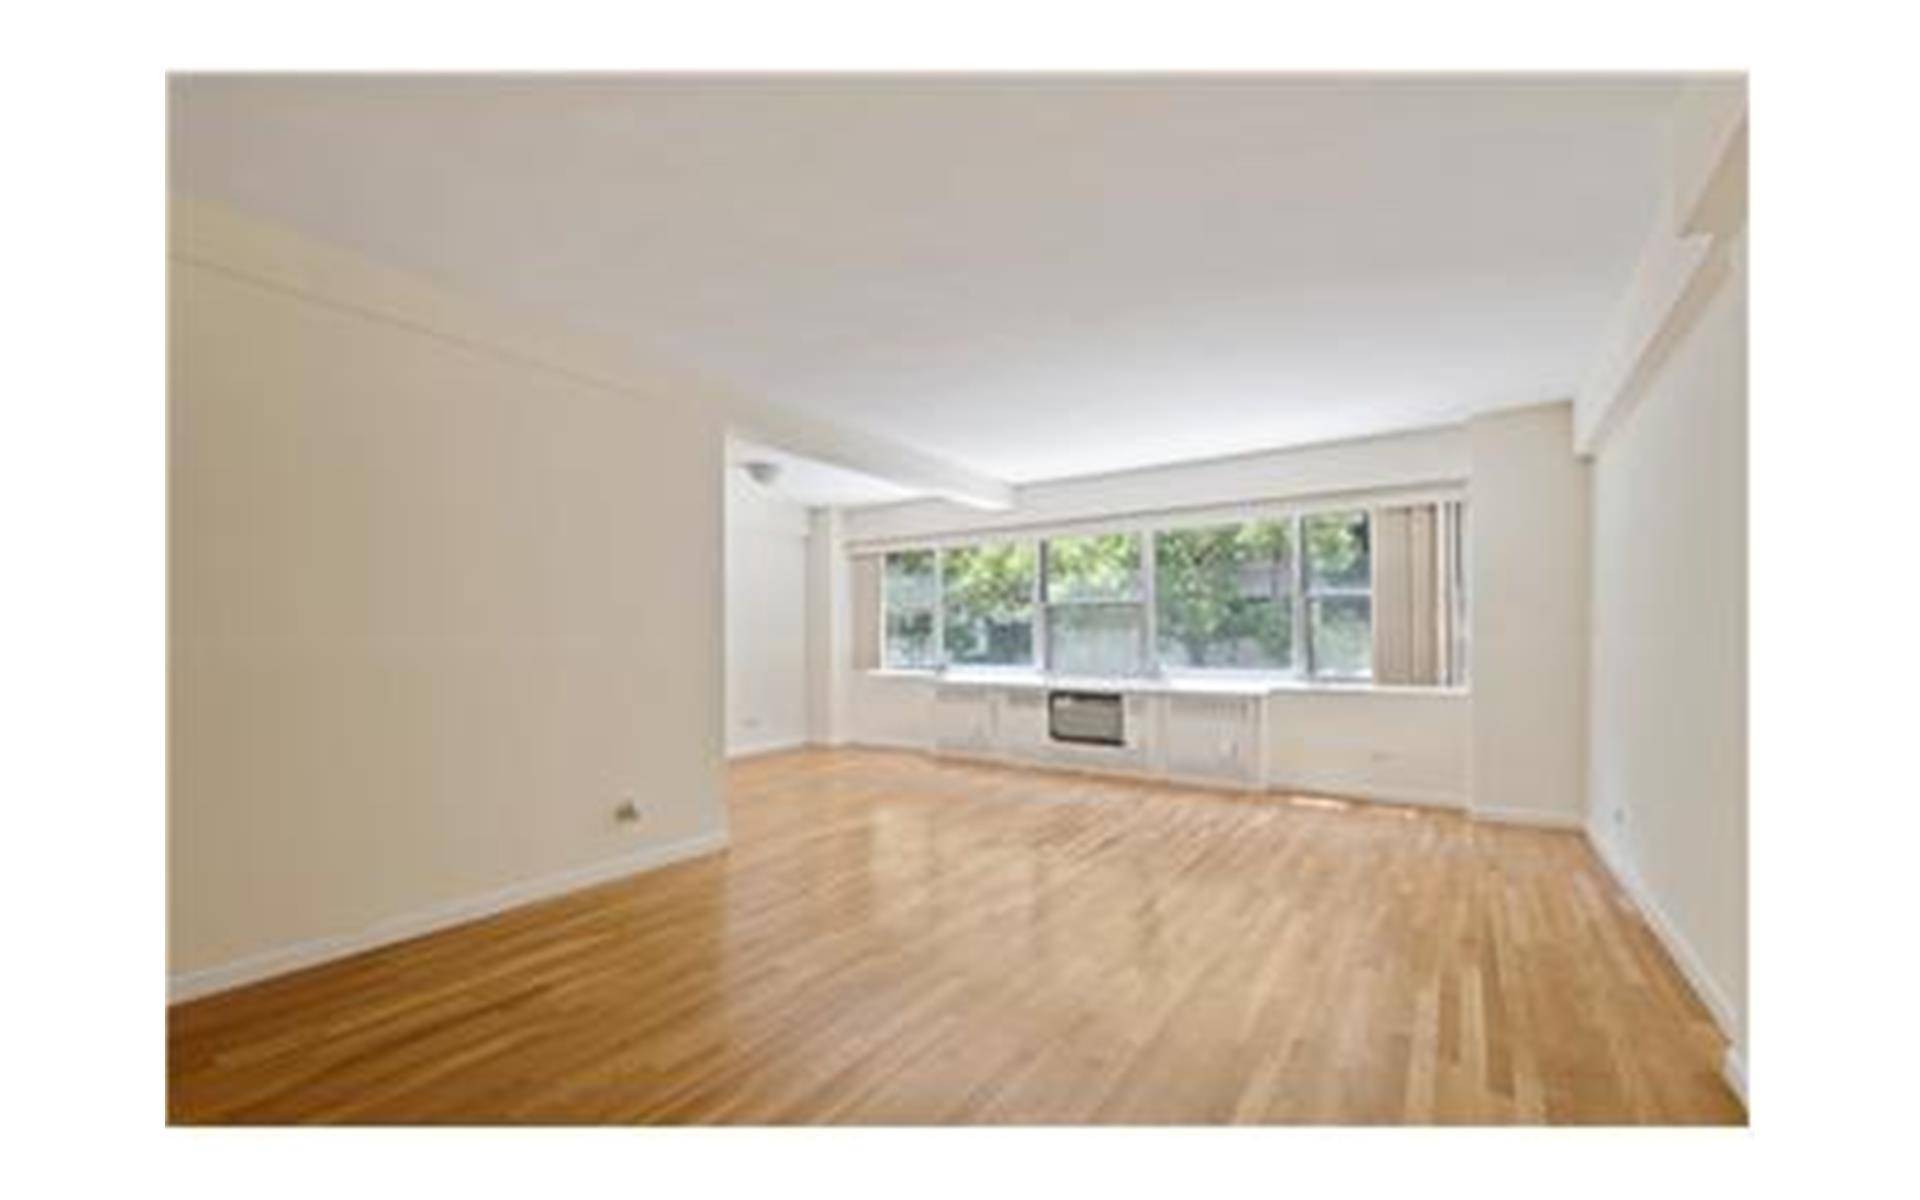 Beautiful New Listing Ideally located Turtle Bay, overlooking Dag Hammarskjold Plaza and the East River, steps away from United Nations easy walk to Grand Central.